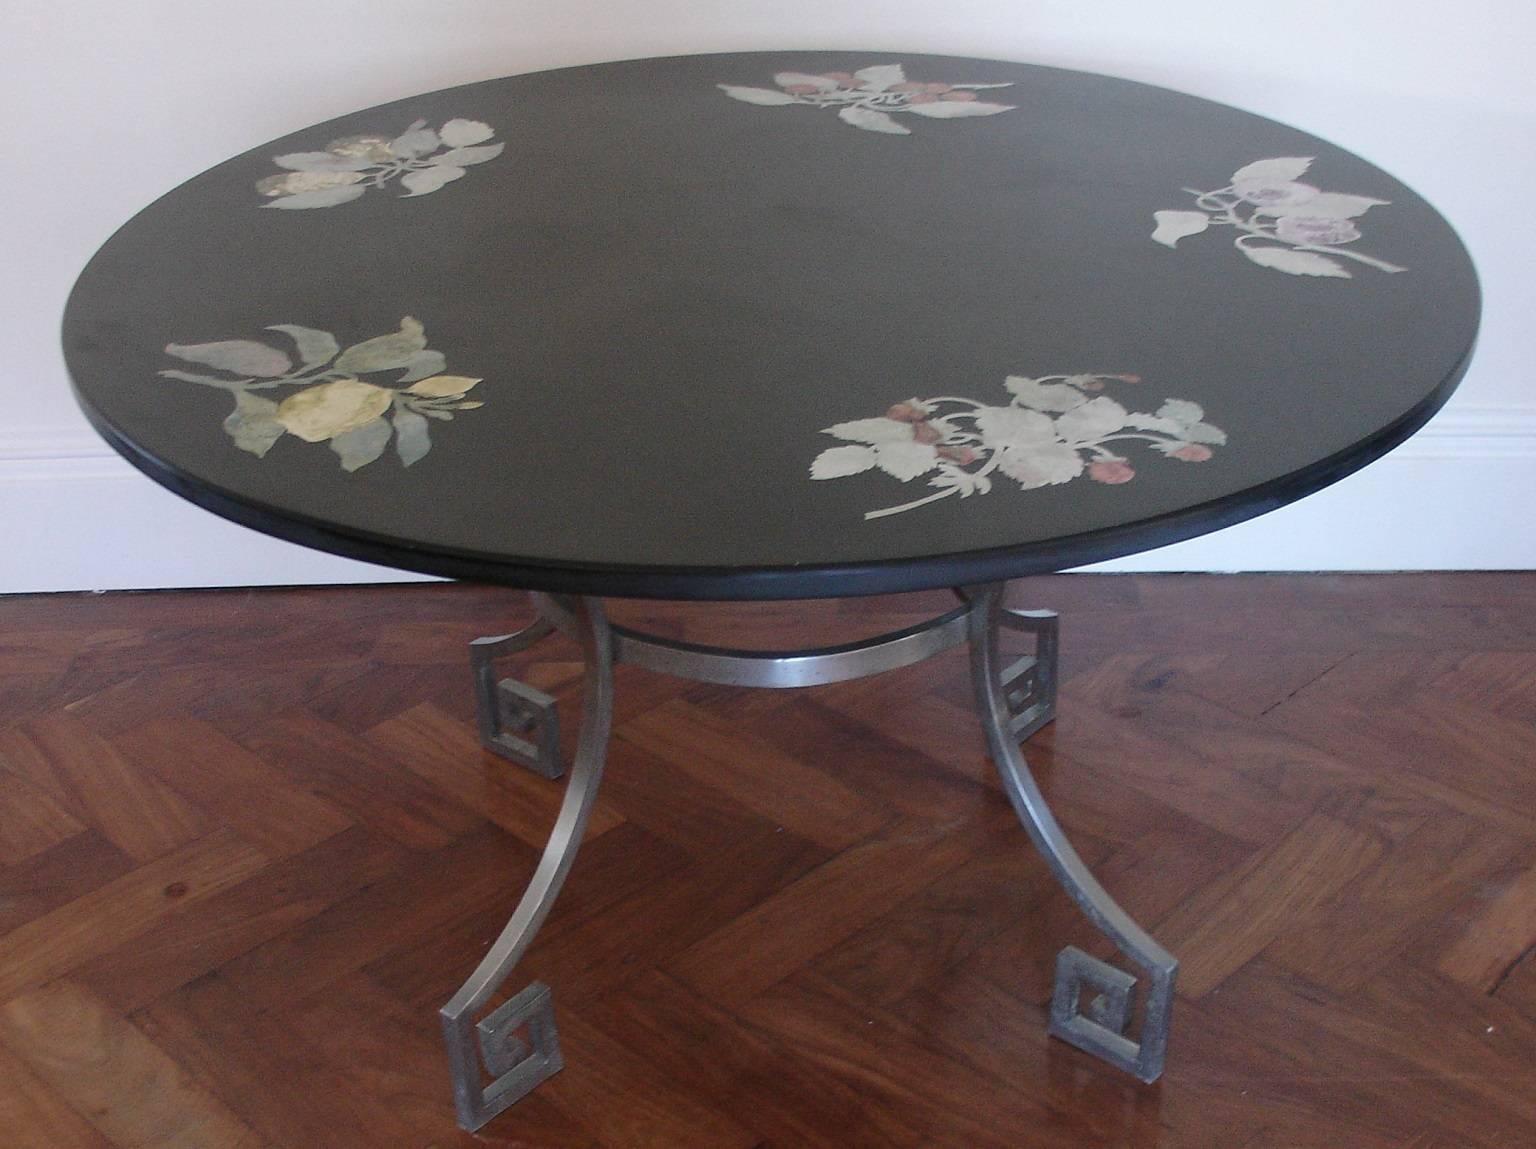 An Italian slate top side/coffee/sofa table with inset flower motifs, hand-painted. The top has the original makers label on the underside. Florentine and made in 1961. Base is brushed steel with Greek key detail.